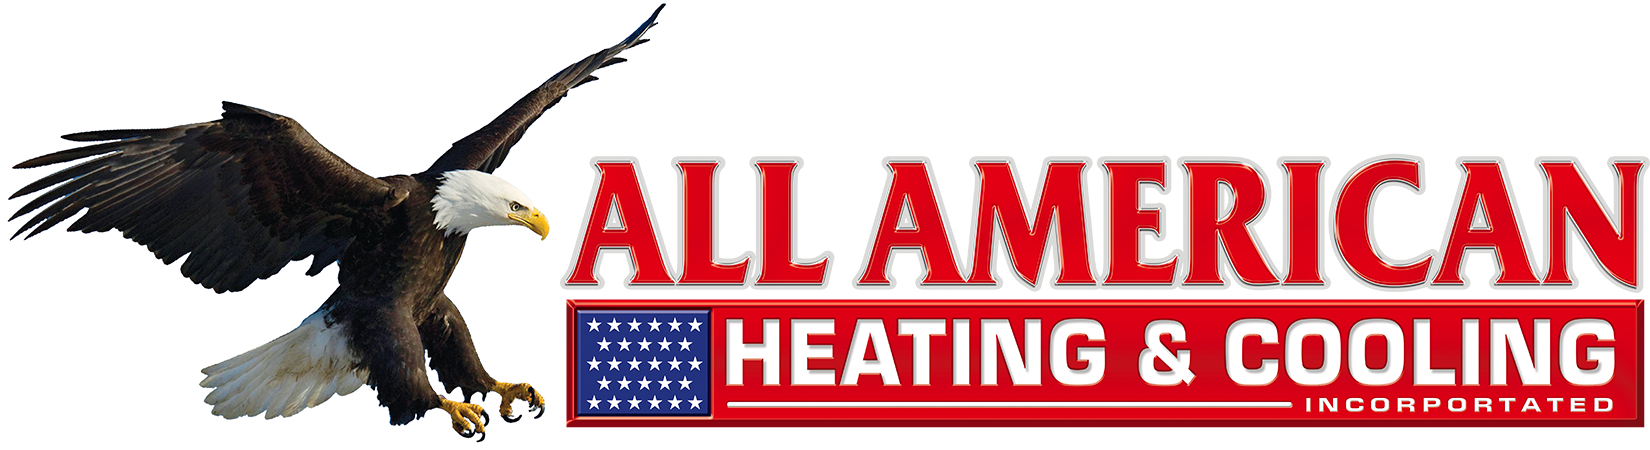 All American Heating and Cooling